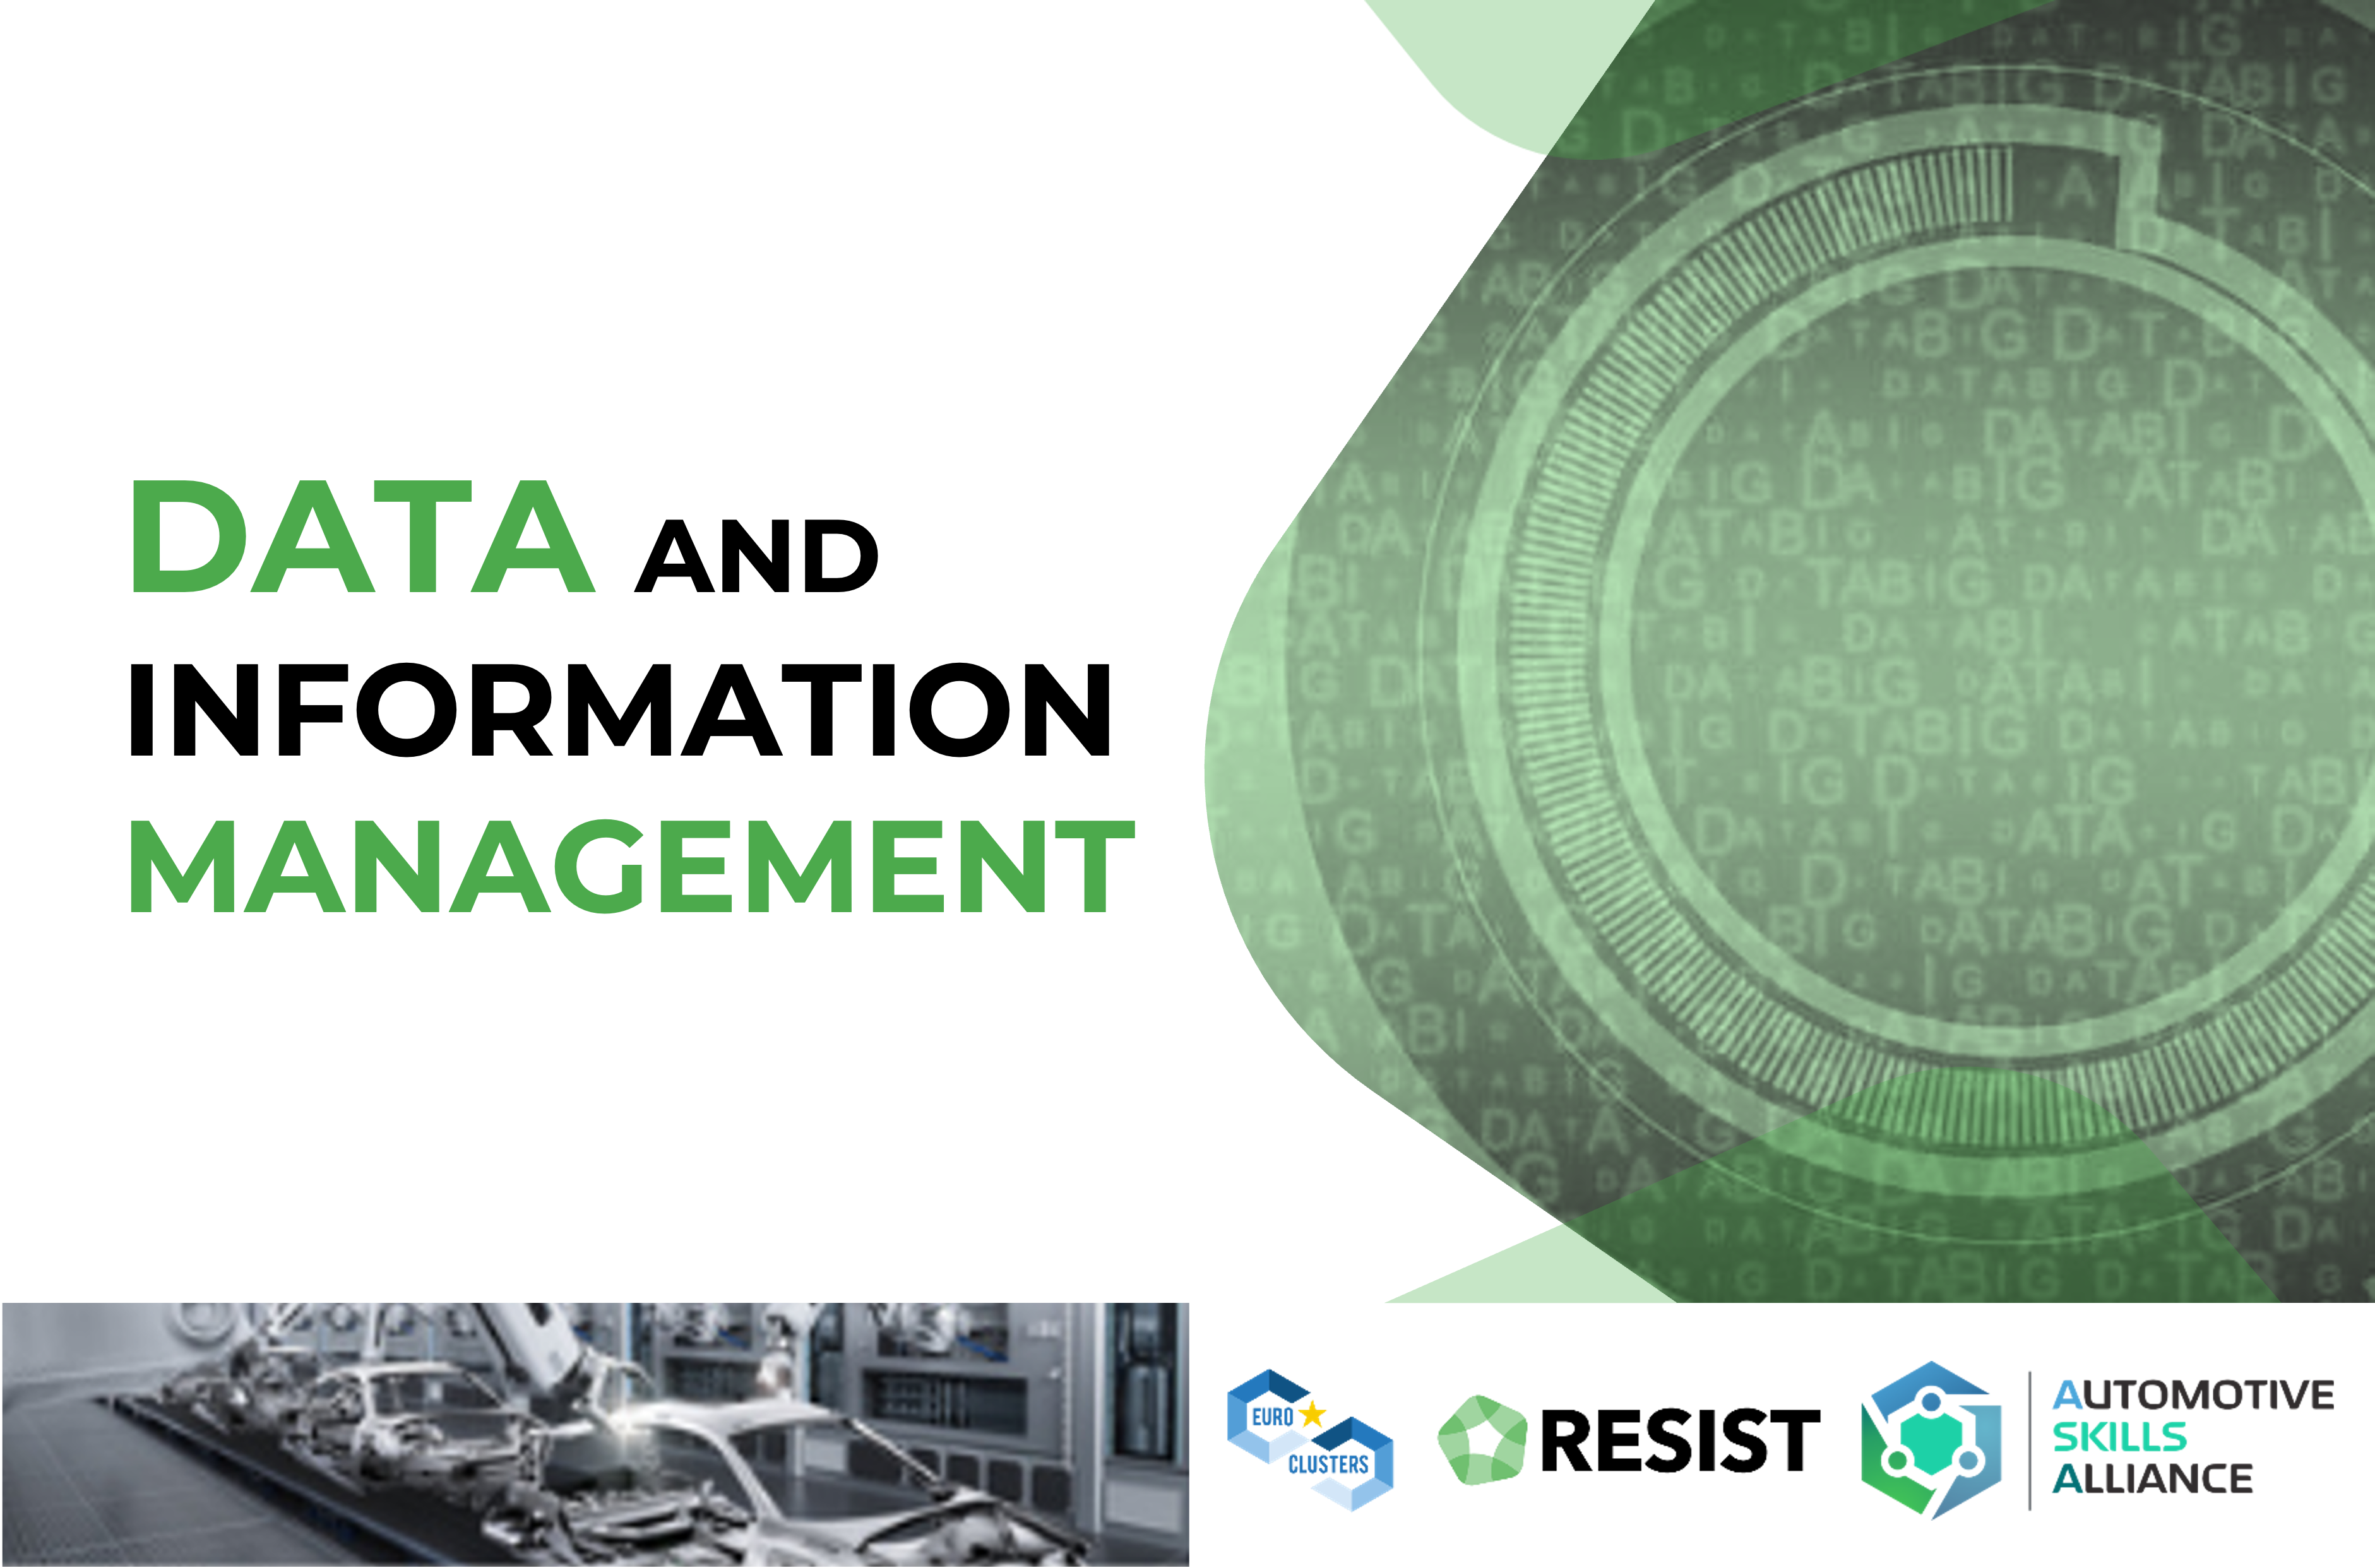 Data and information management